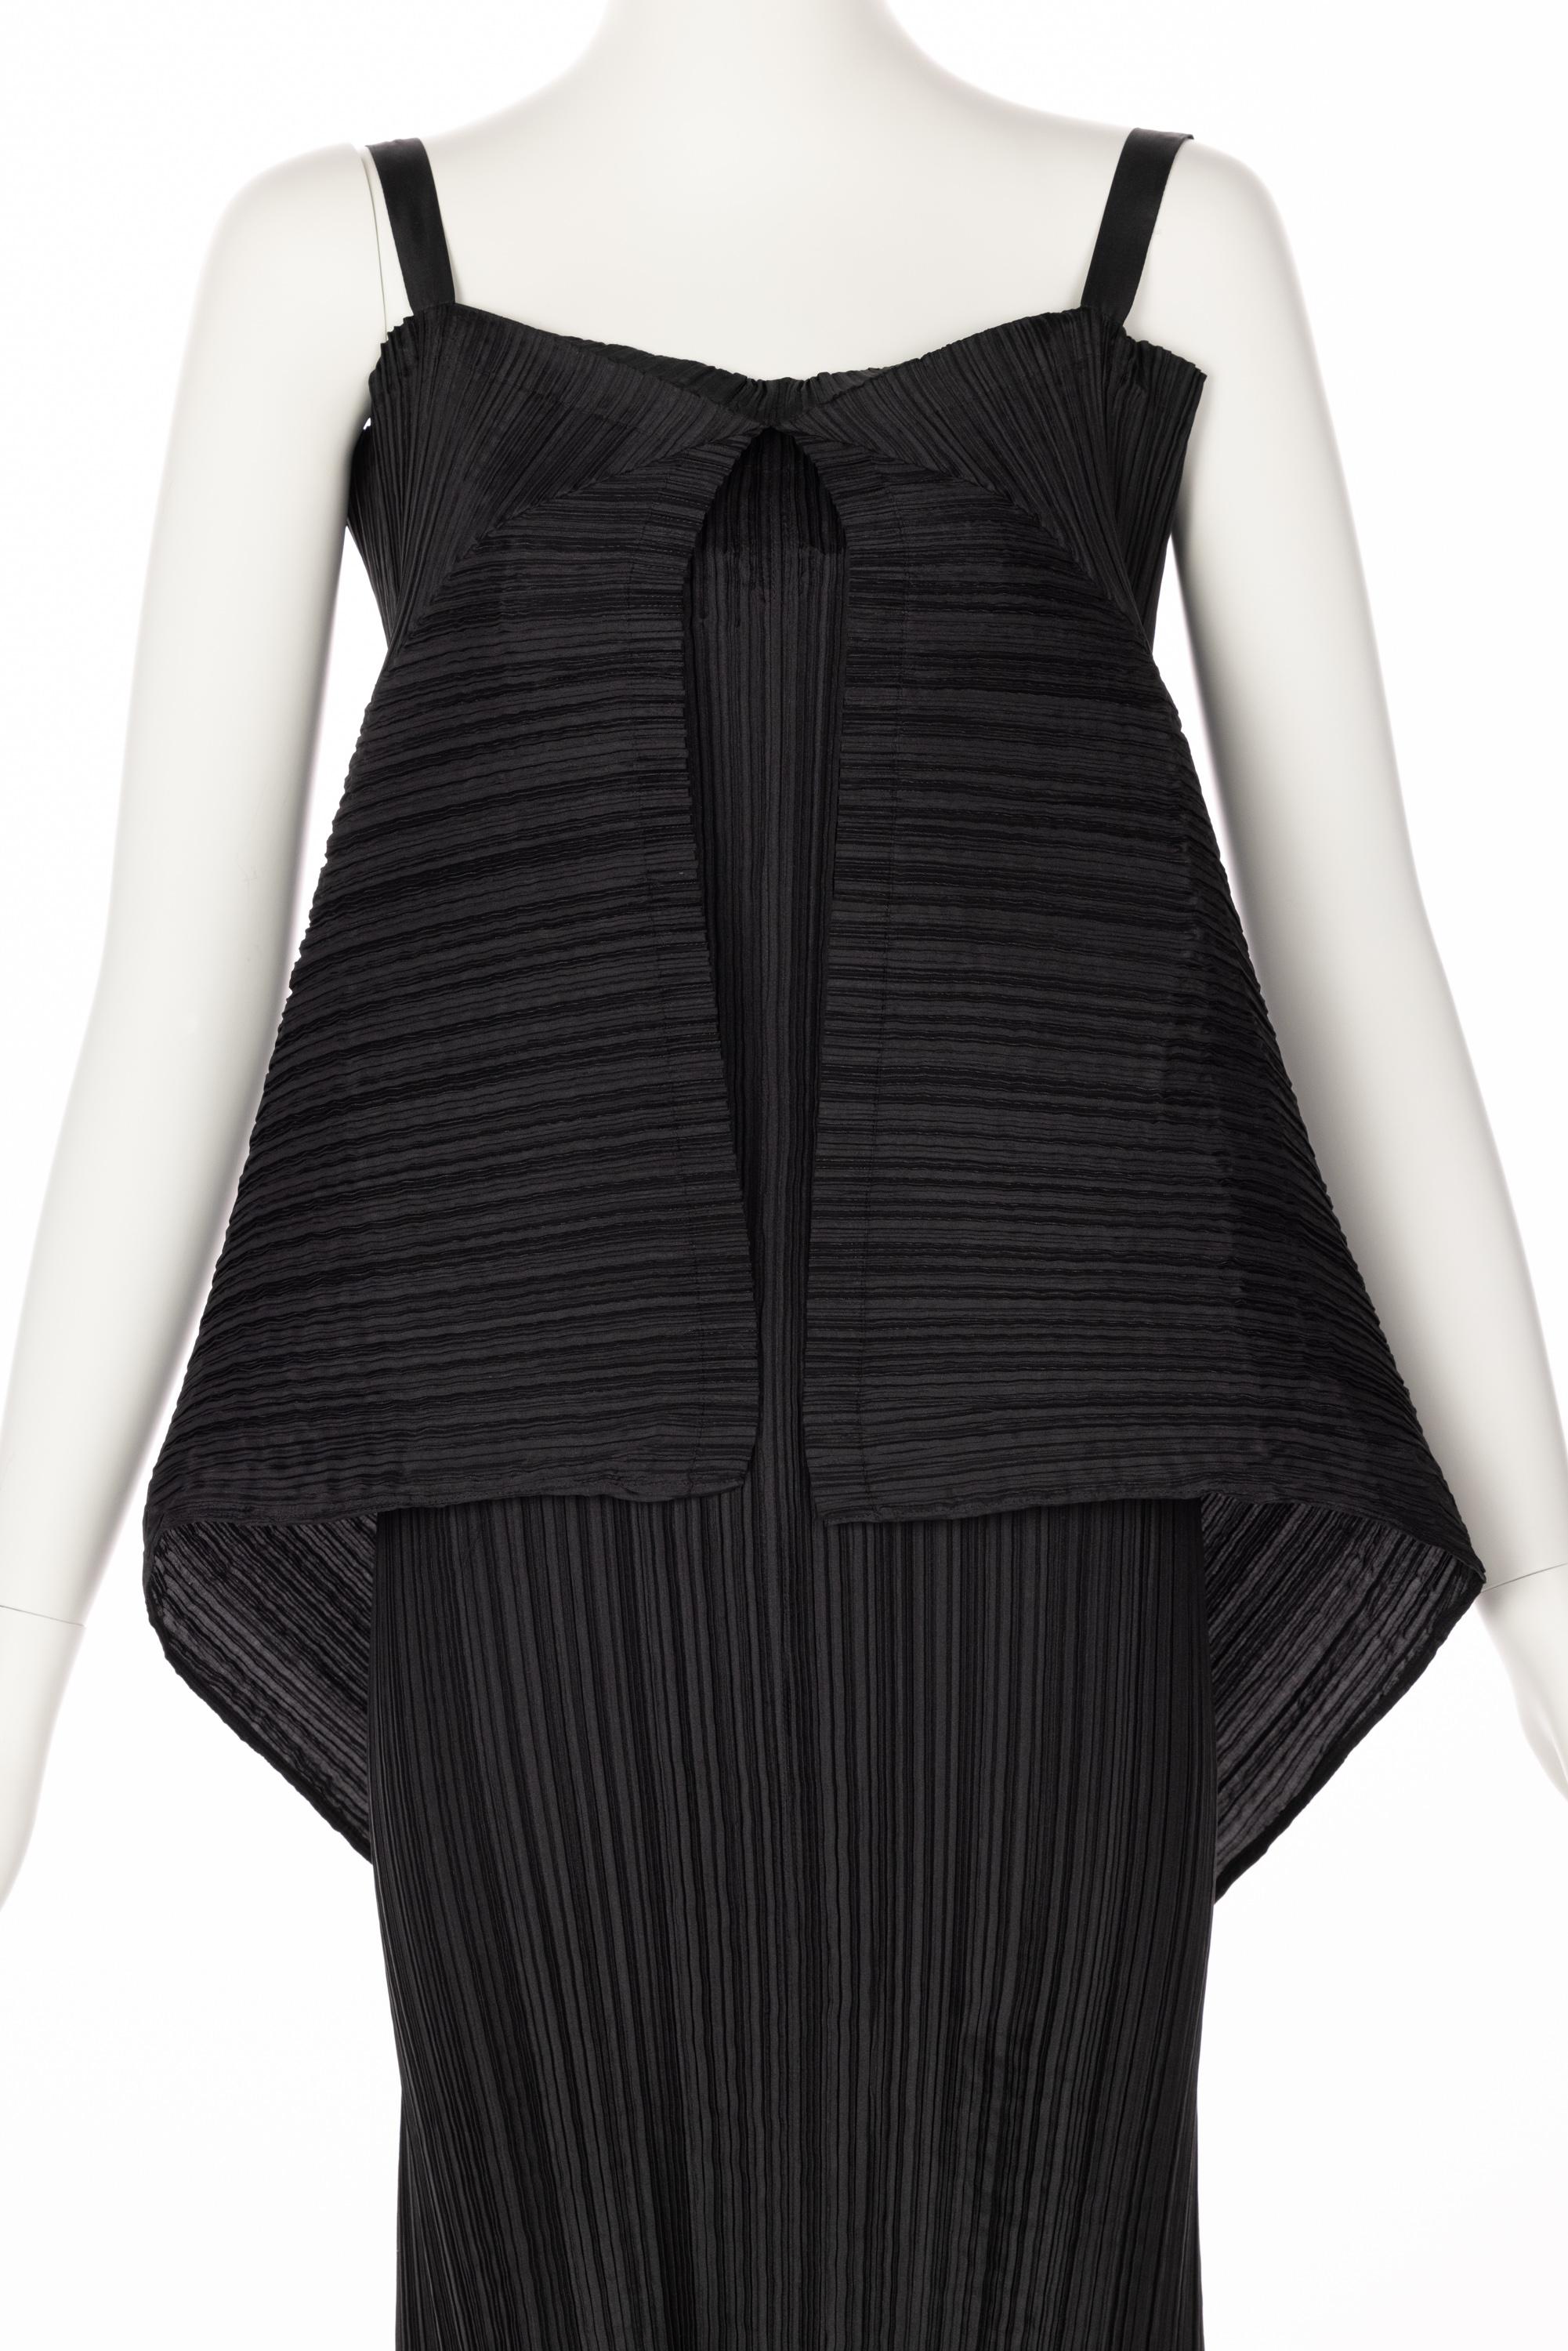 Issey Miyake Black Pleated Sculptural Sleeveless Maxi Dress, 1990s For Sale 4